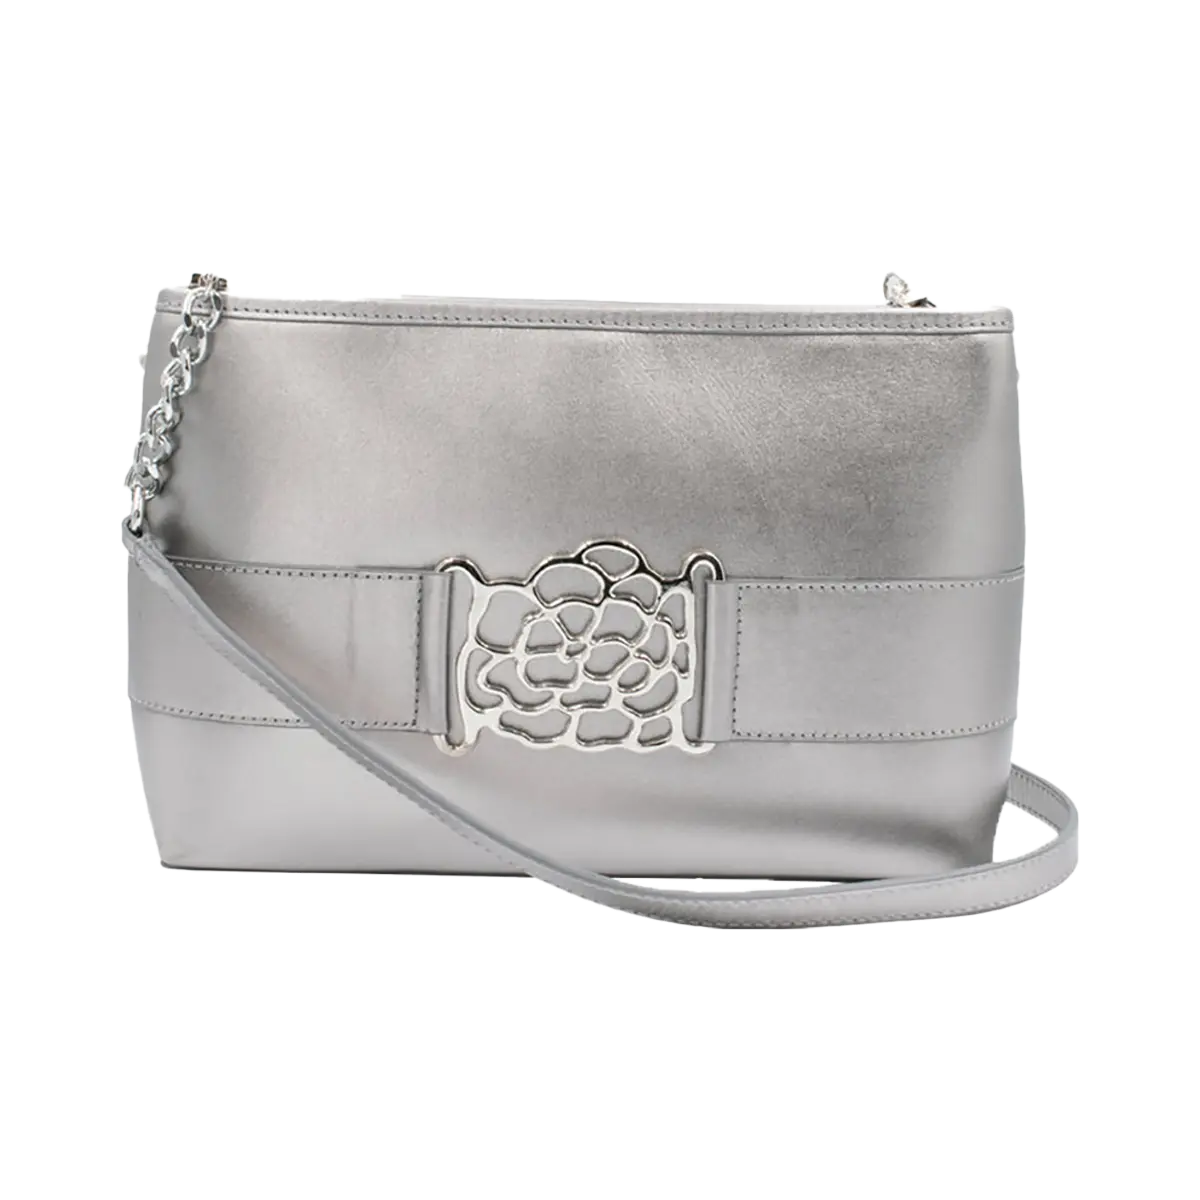 small silver leather shoulder bag with metal accent. Fashion accessory for women in San Diego, CA.